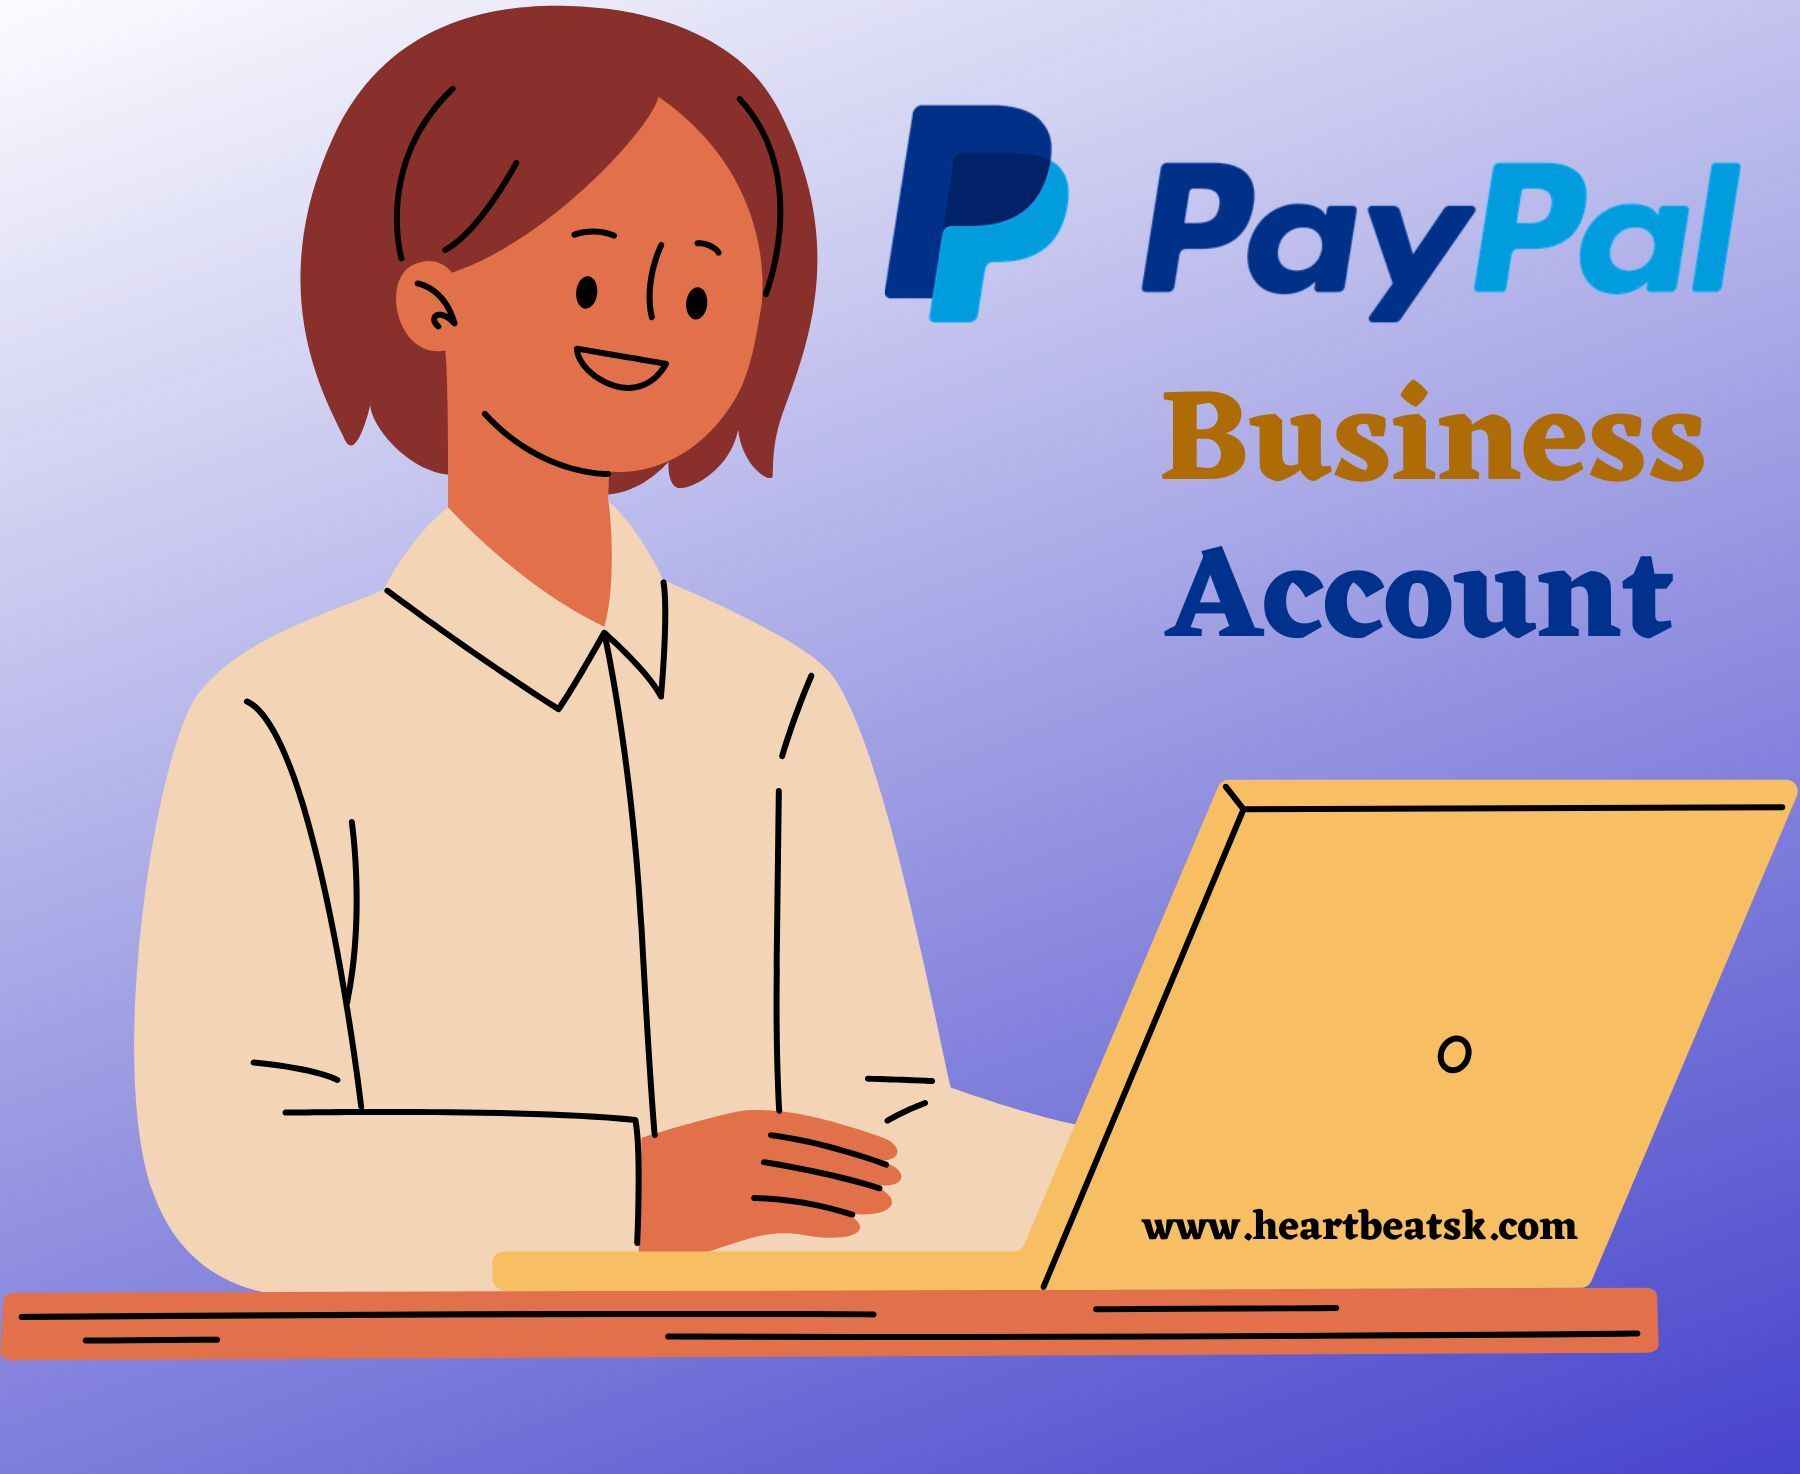 PayPal Business Account Kaise Banaye